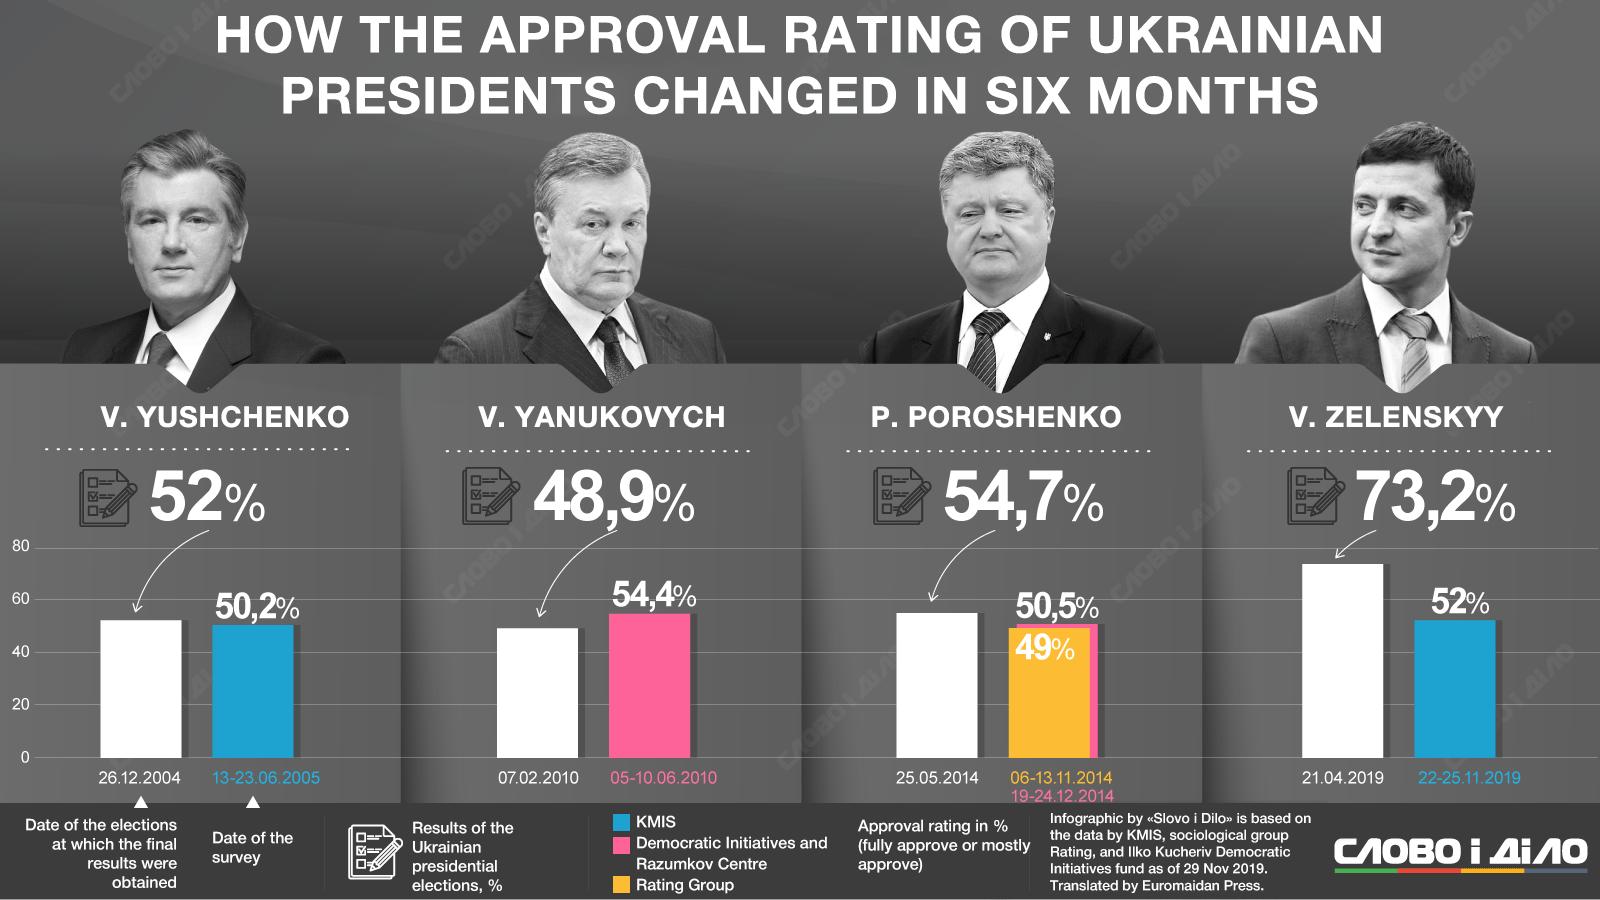 While drops in approval ratings of presidents are usual for Ukraine, Zelenskyy’s 20% approval rating drop in the first six months stands out from the approval rating changes of the previous three presidents. Infographic by Slovo i Dilo, translated by Euromaidan Press ~